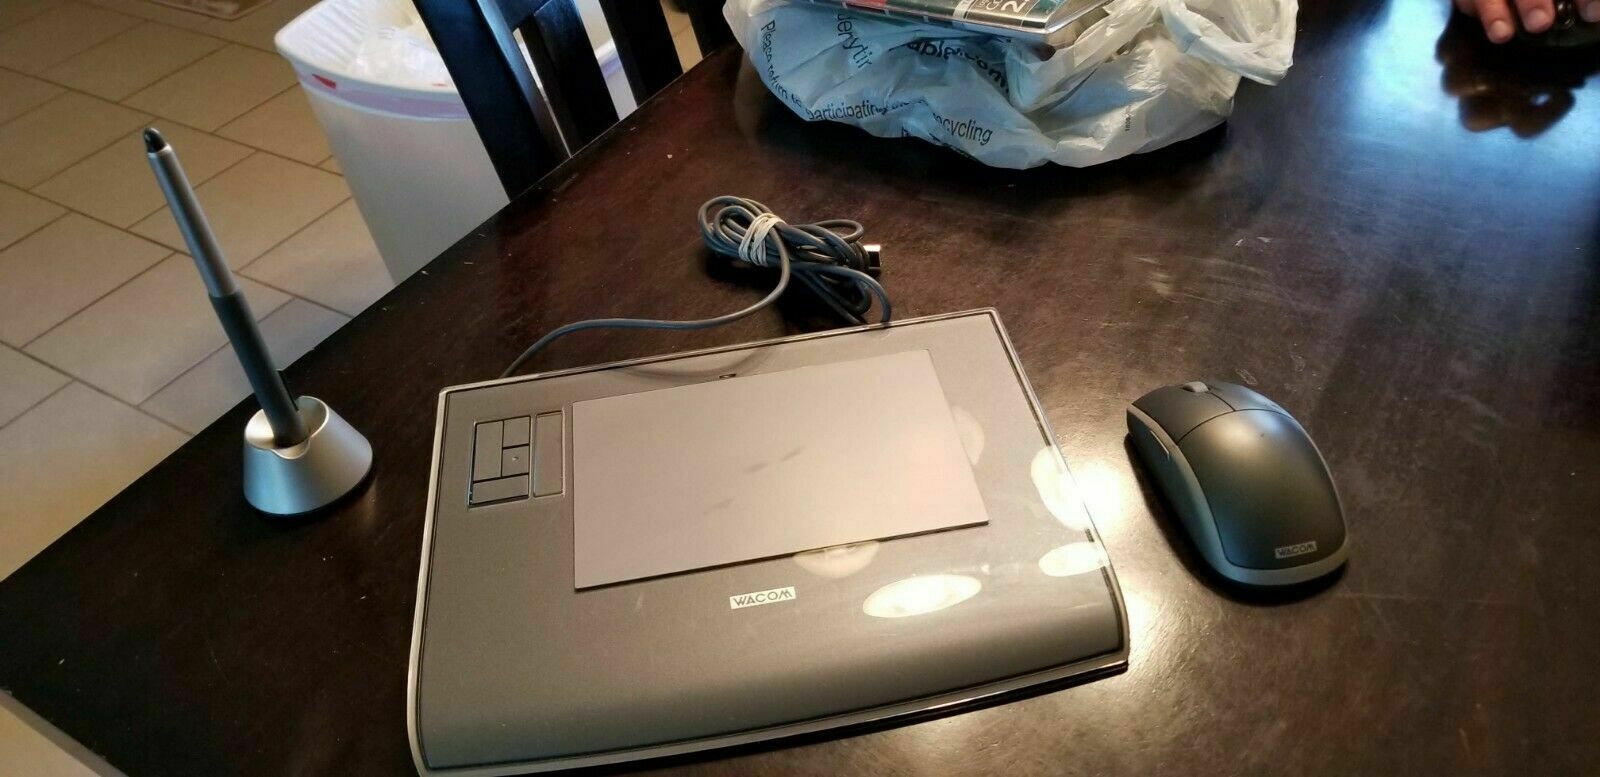 Intuos 3 PTZ431W Drawing Graphics Gray Tablet Art Electronic